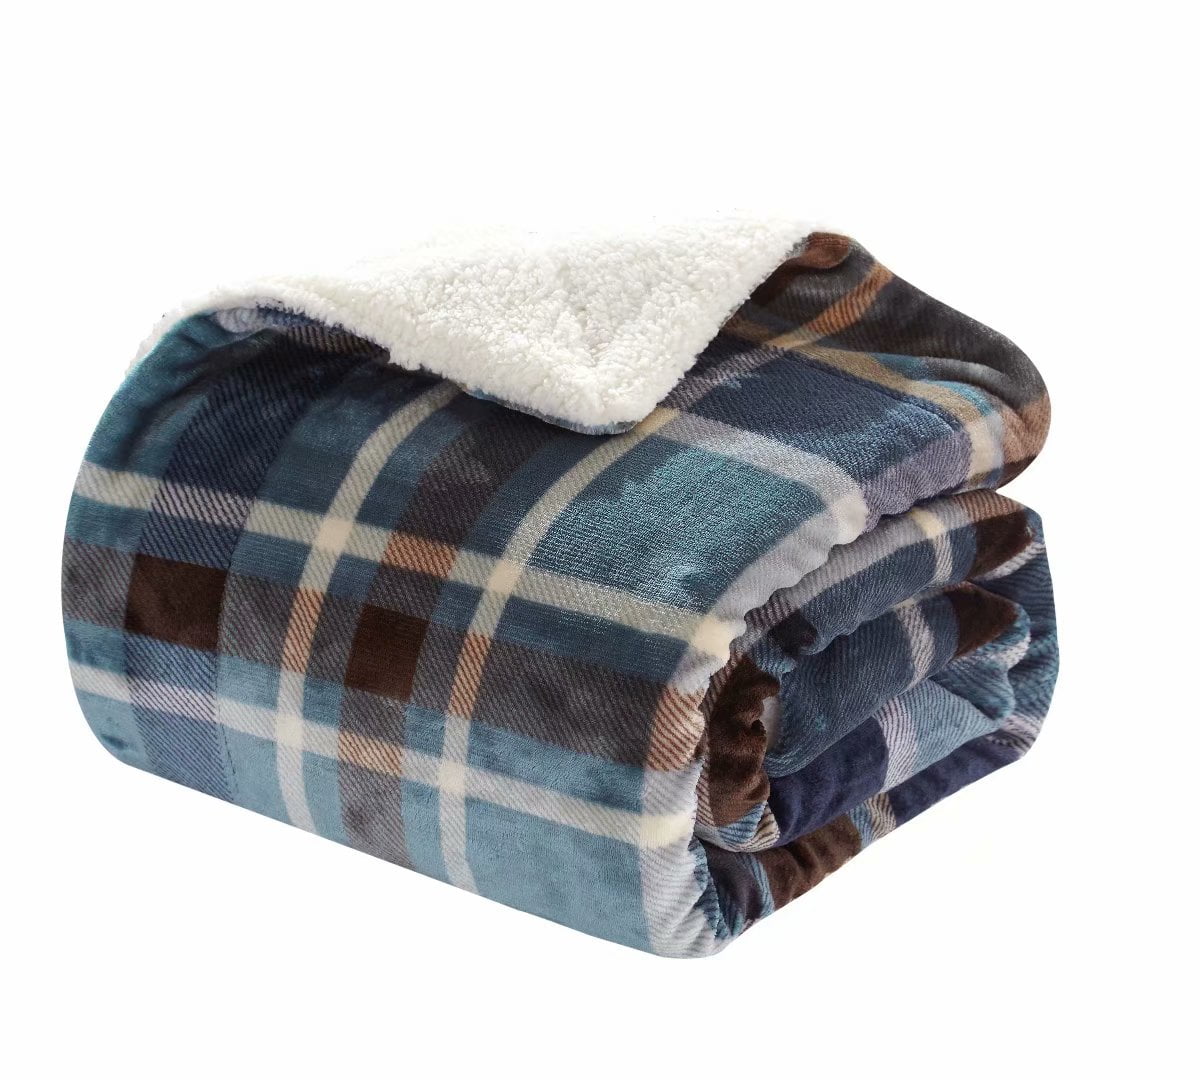 Indepandence Day Sherpa Flannel Throw Blankets Thick Reversible Plush Fleece Blanket for Bed Couch Sofa Decor USA Flag Gnome Firework Wood Ultra Soft Comfy Warm Fuzzy TV Blanket 59x79in